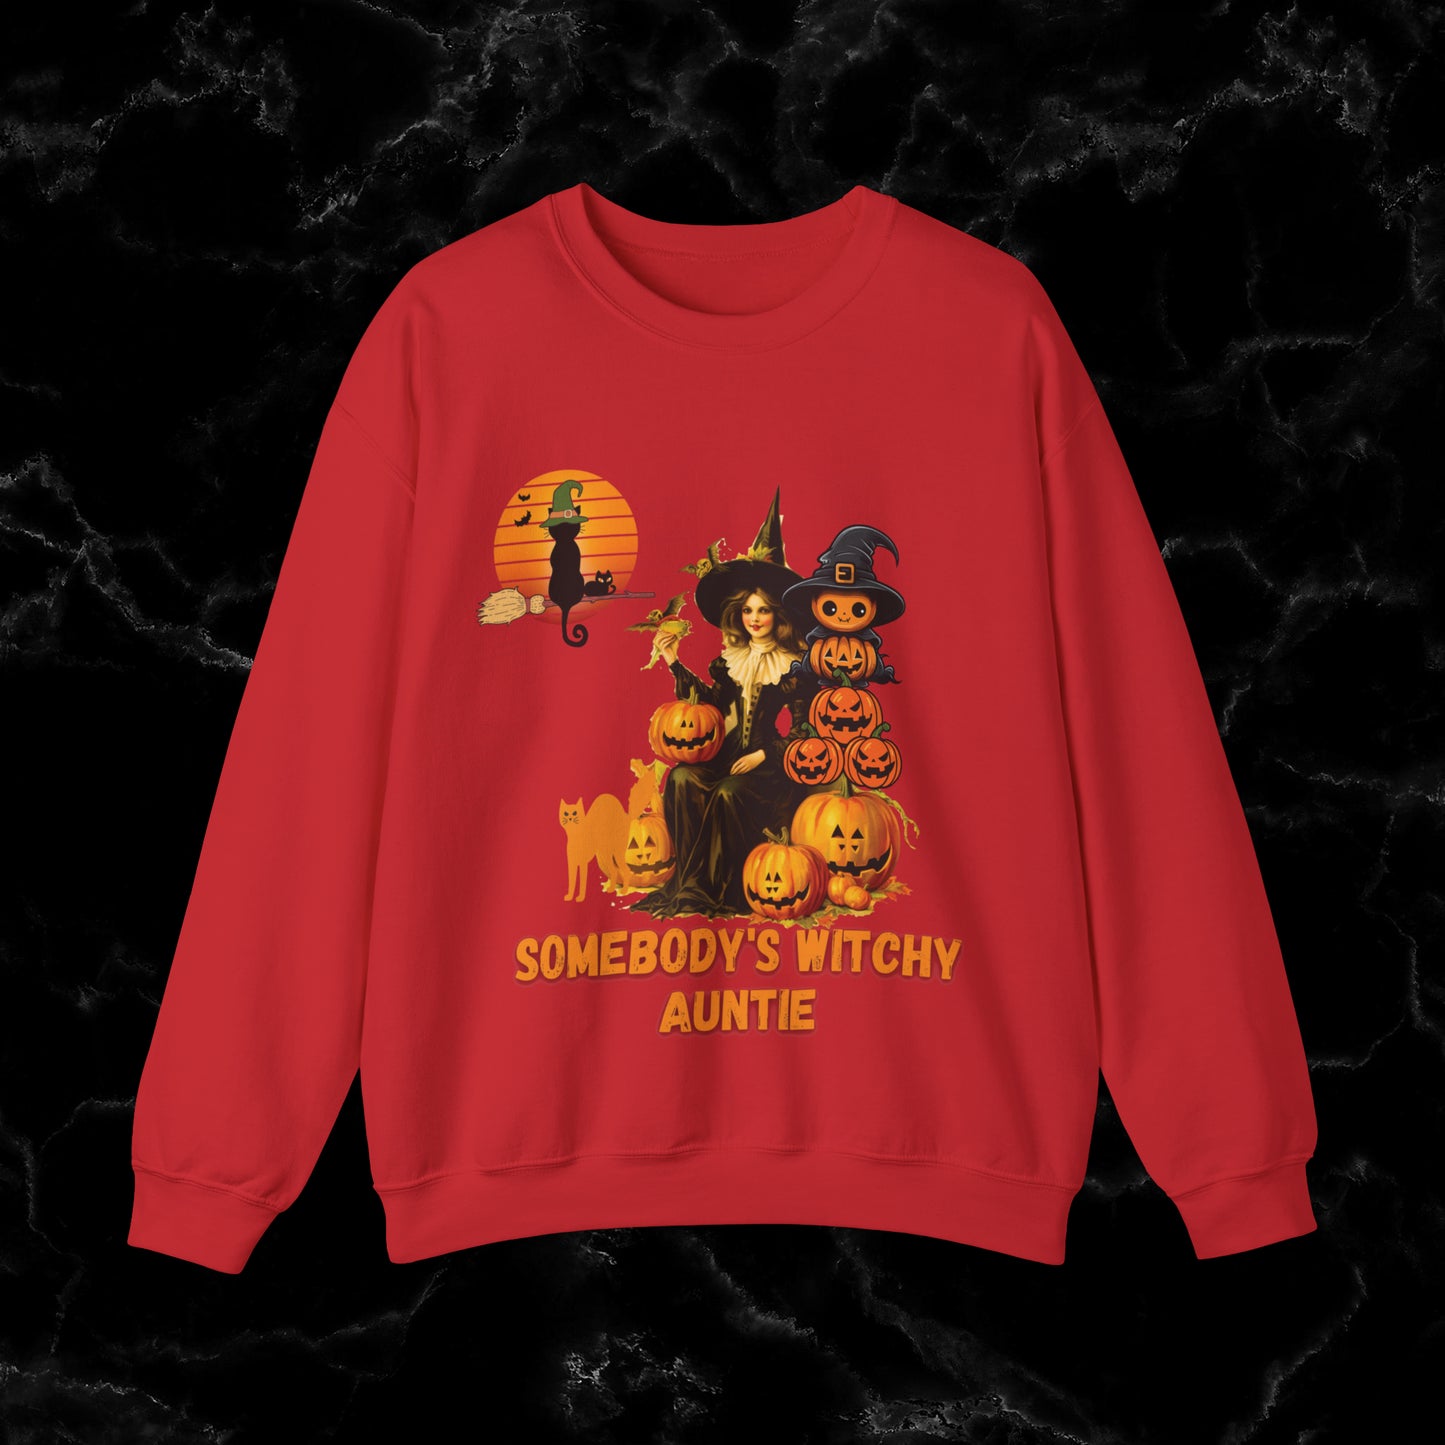 Somebody's Witchy Auntie Sweatshirt - Cool Aunt Shirt for Halloween Sweatshirt S Red 